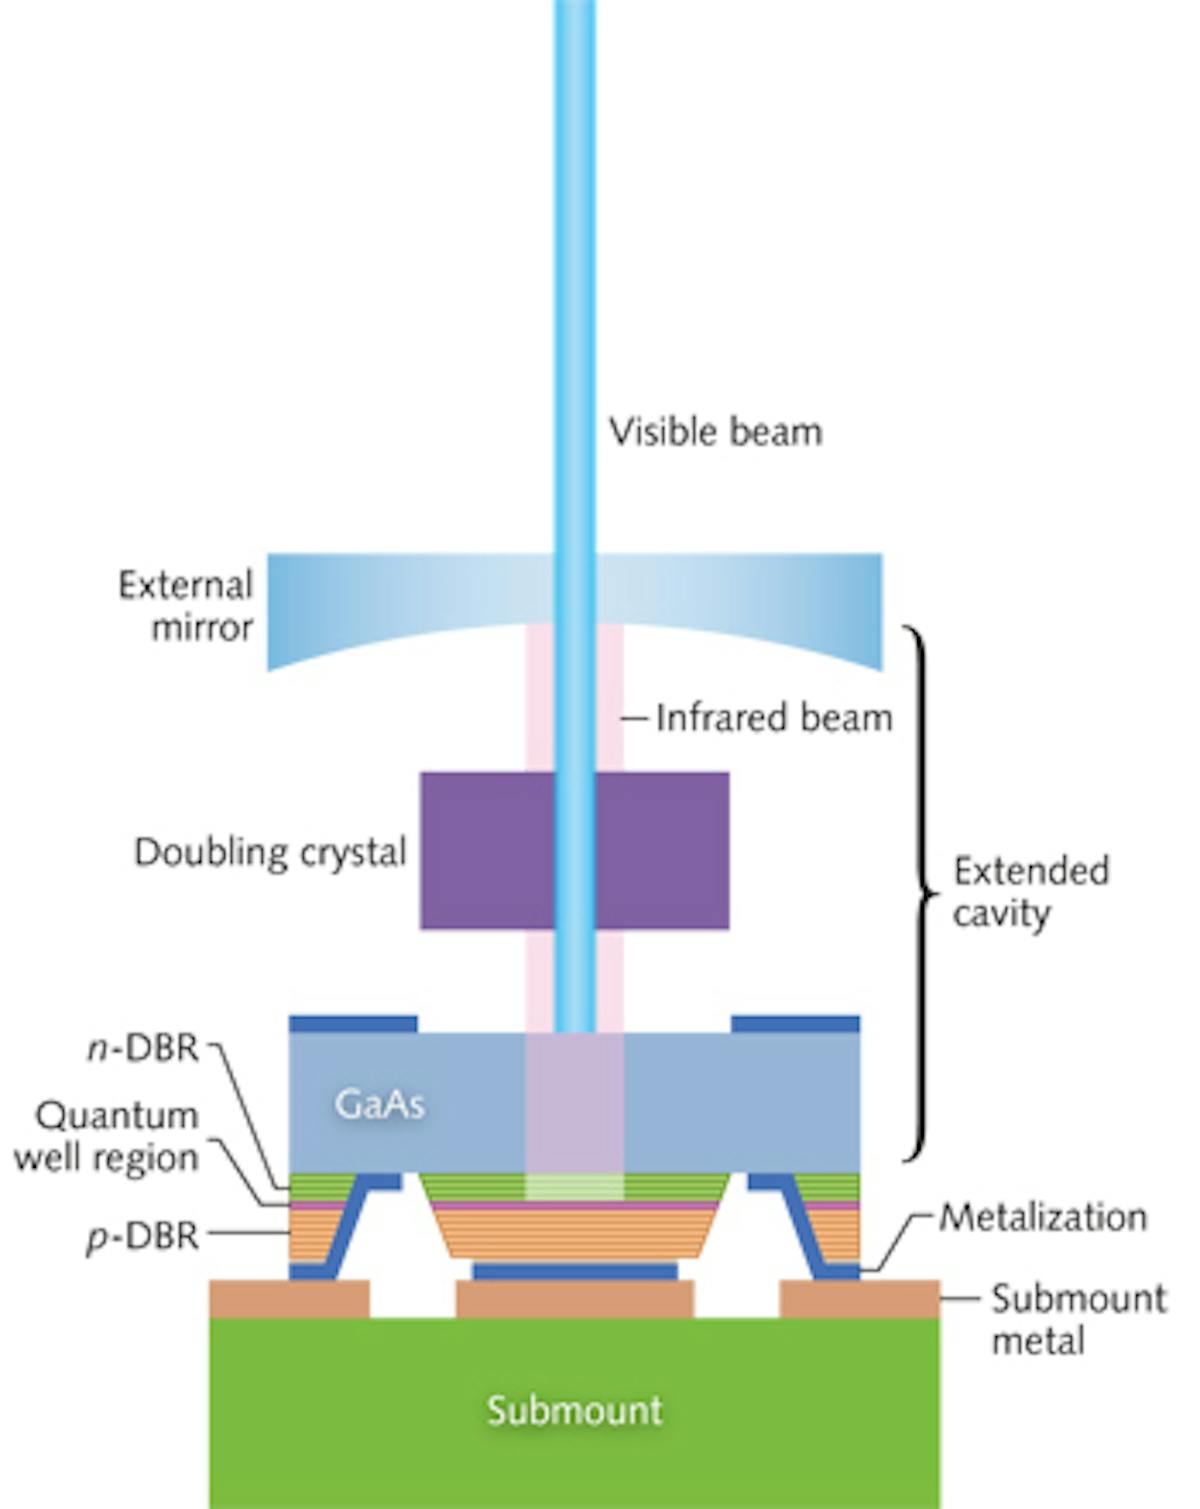 FIGURE 1. Structure of Necsel&apos;s electrically-pumped VECSEL, showing the intracavity doubling crystal. Light generated in the quantum-well region oscillates vertically. Dark blue layers are the electrodes through which the drive current flows.